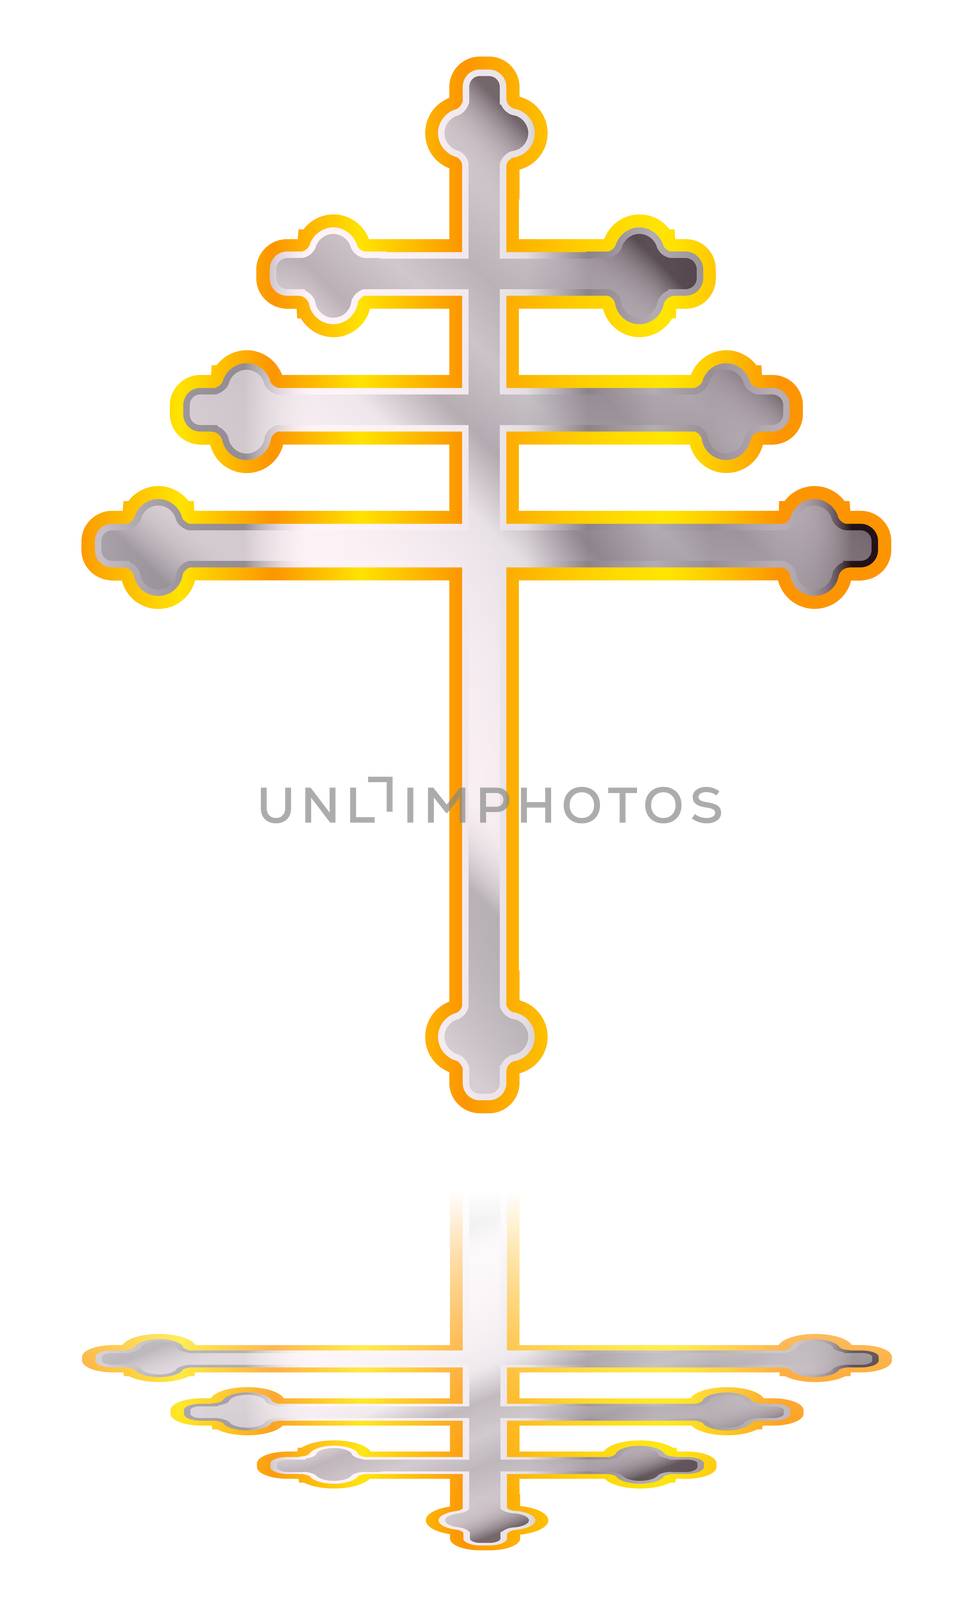 A Christian Maronite cross in silver and gold over a white background